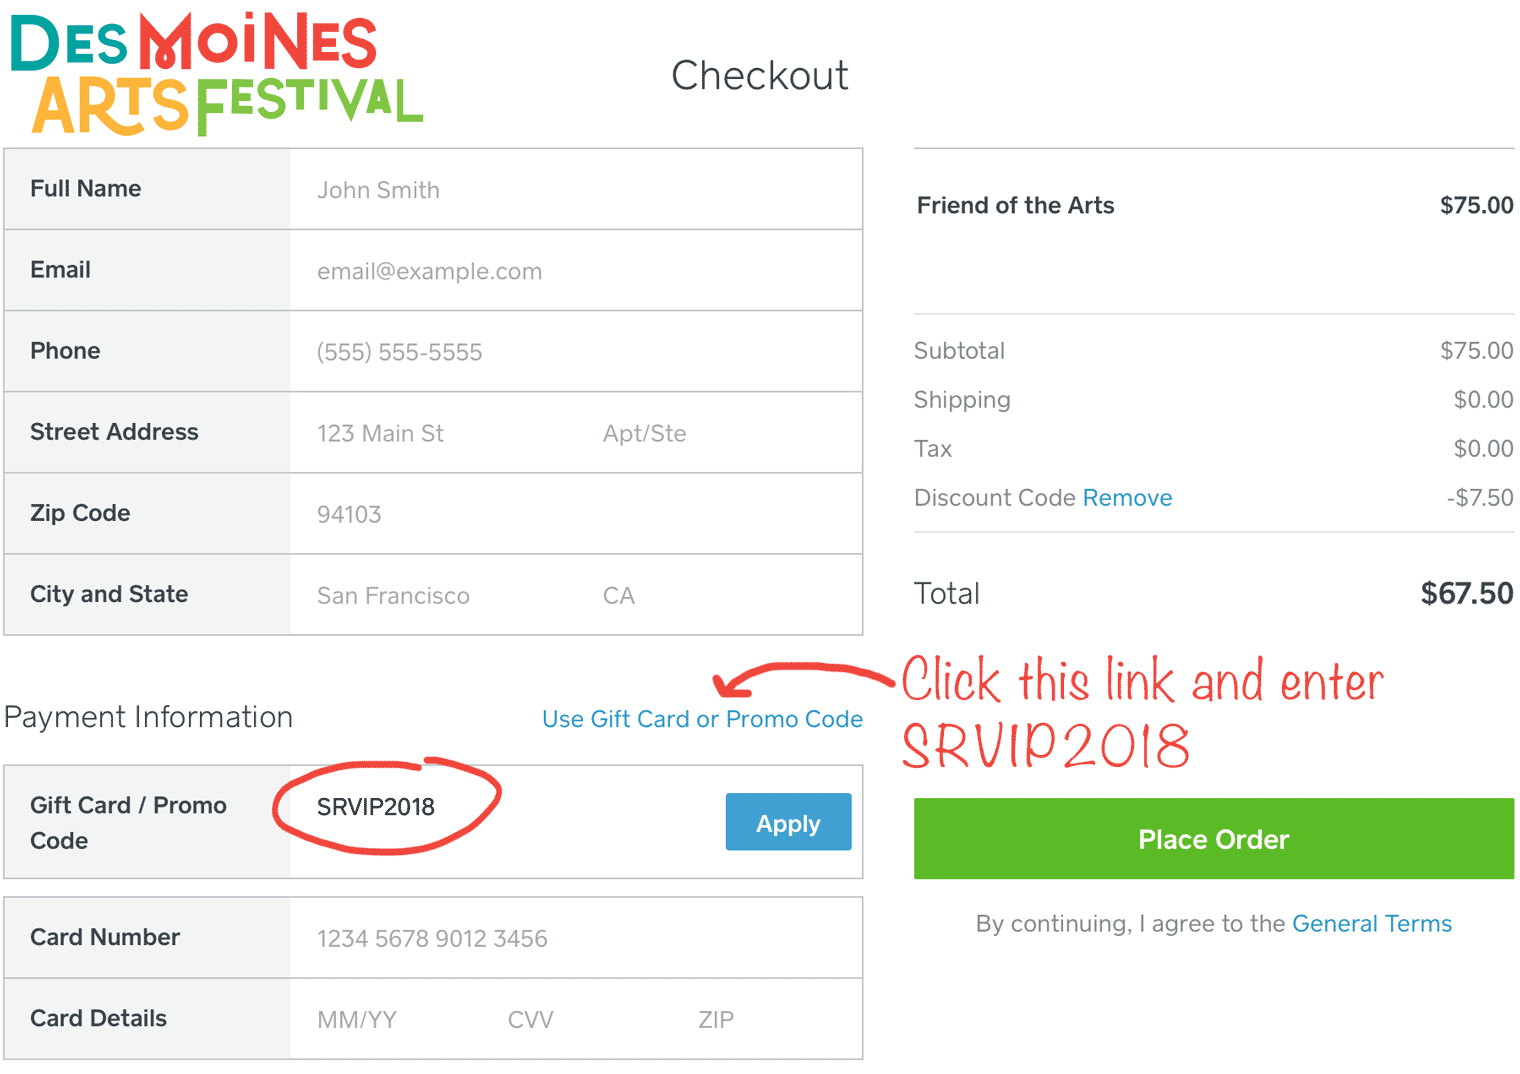 This screenshot shows where to enter the Silent Rivers promo code during the Des Moines Arts Festival online checkout process.